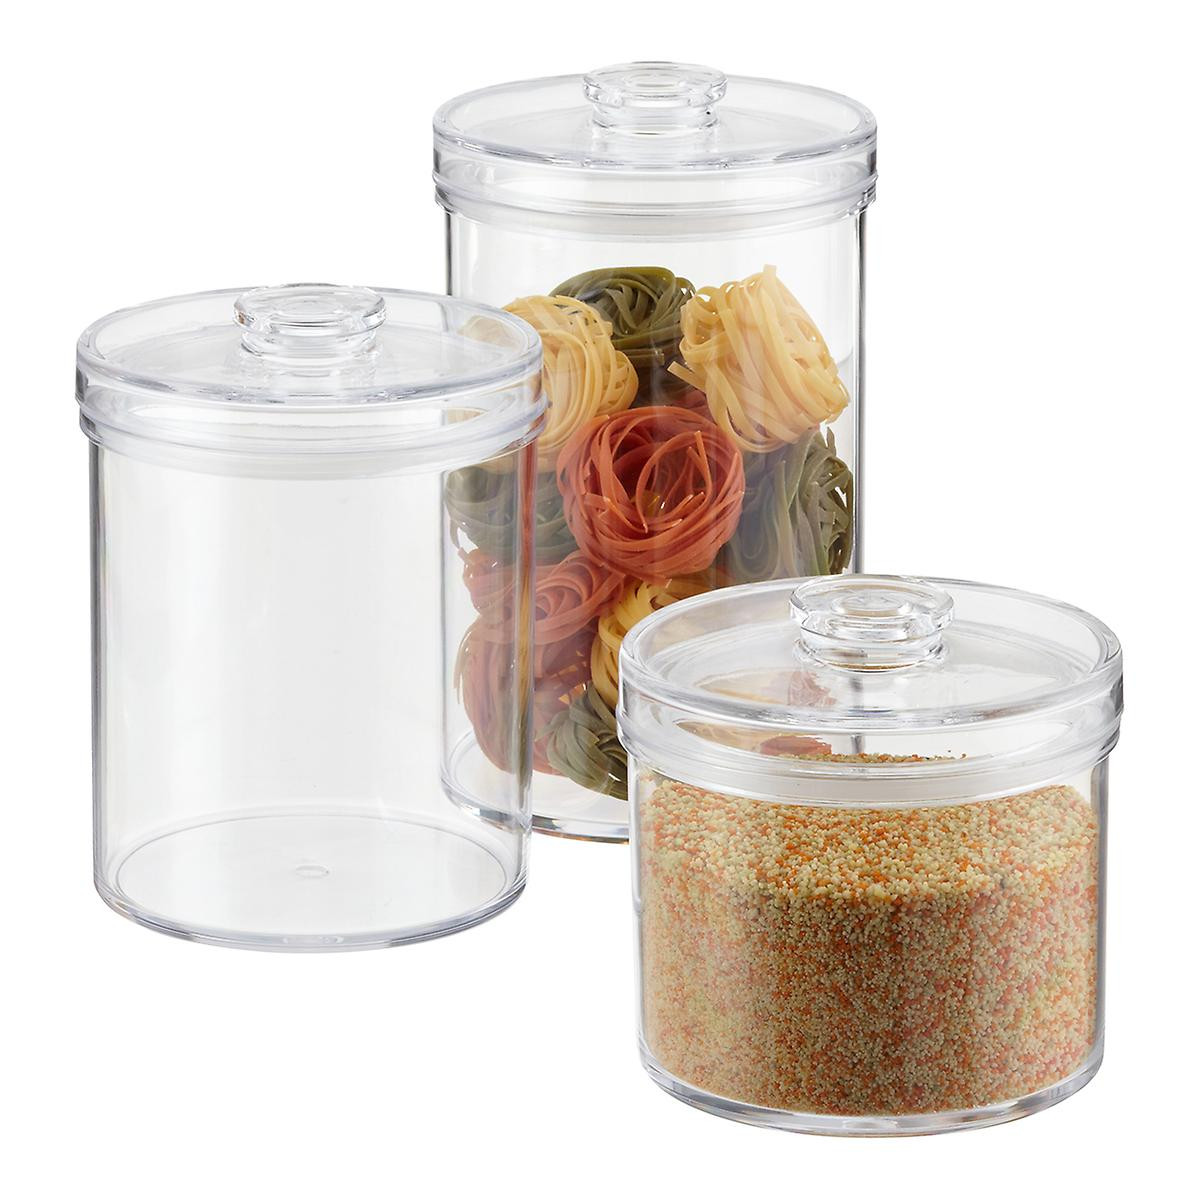 Kitchen Storage Canisters
 Acrylic Canisters Clear Round Acrylic Canisters